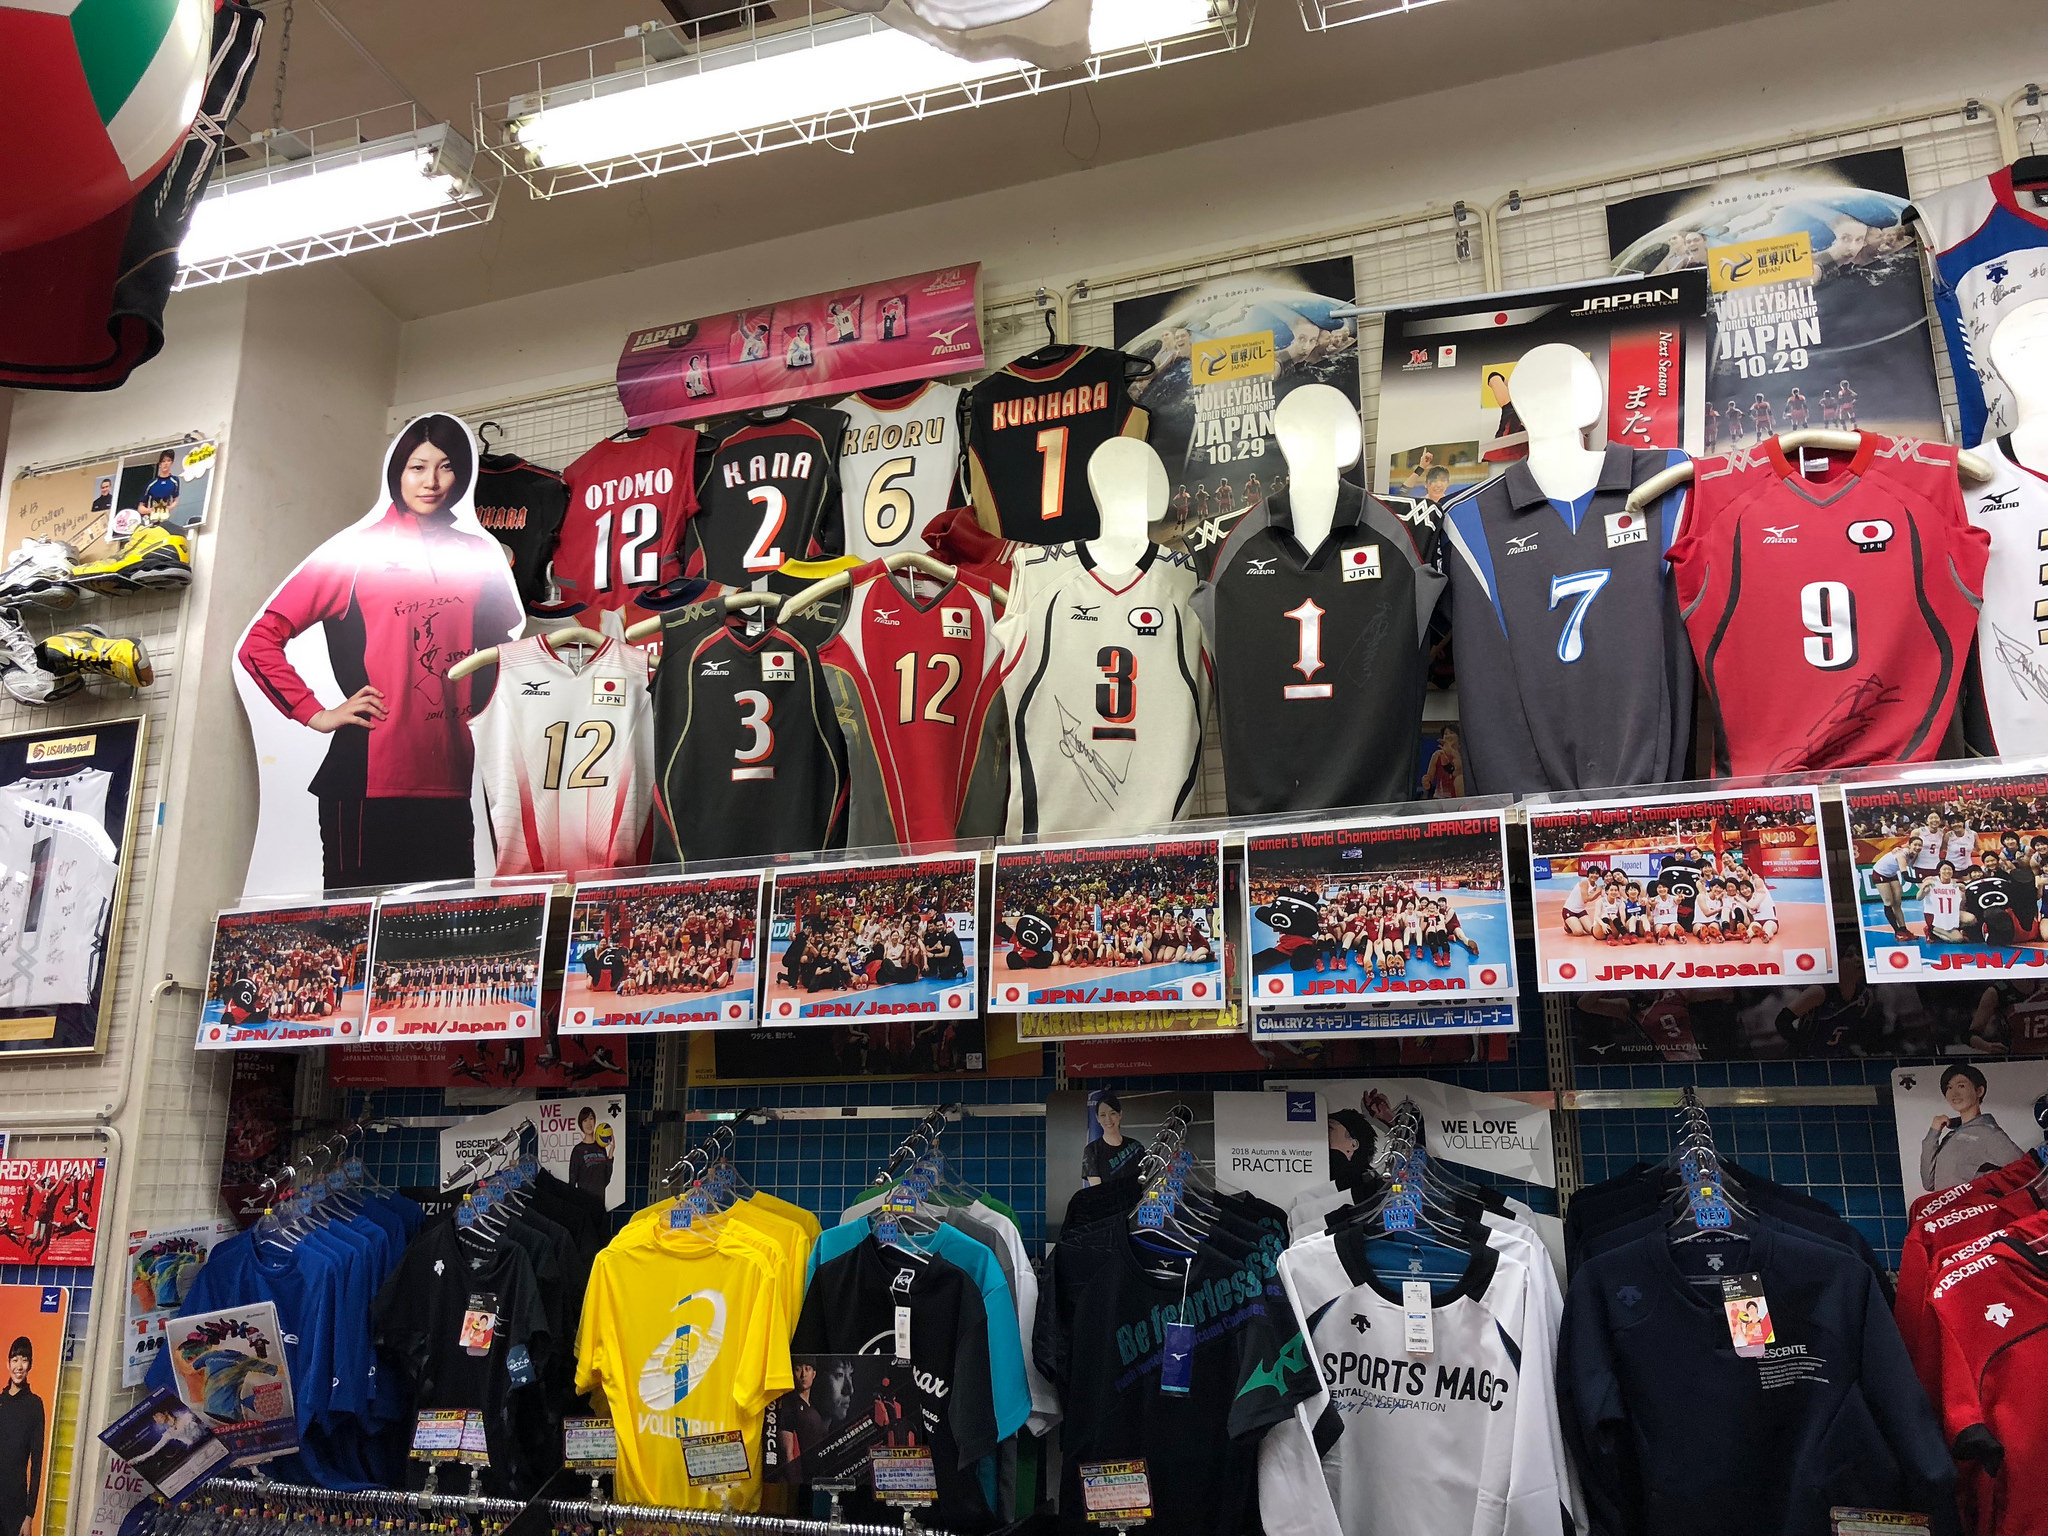 Shinjuku is Japan's Best Volleyball Store